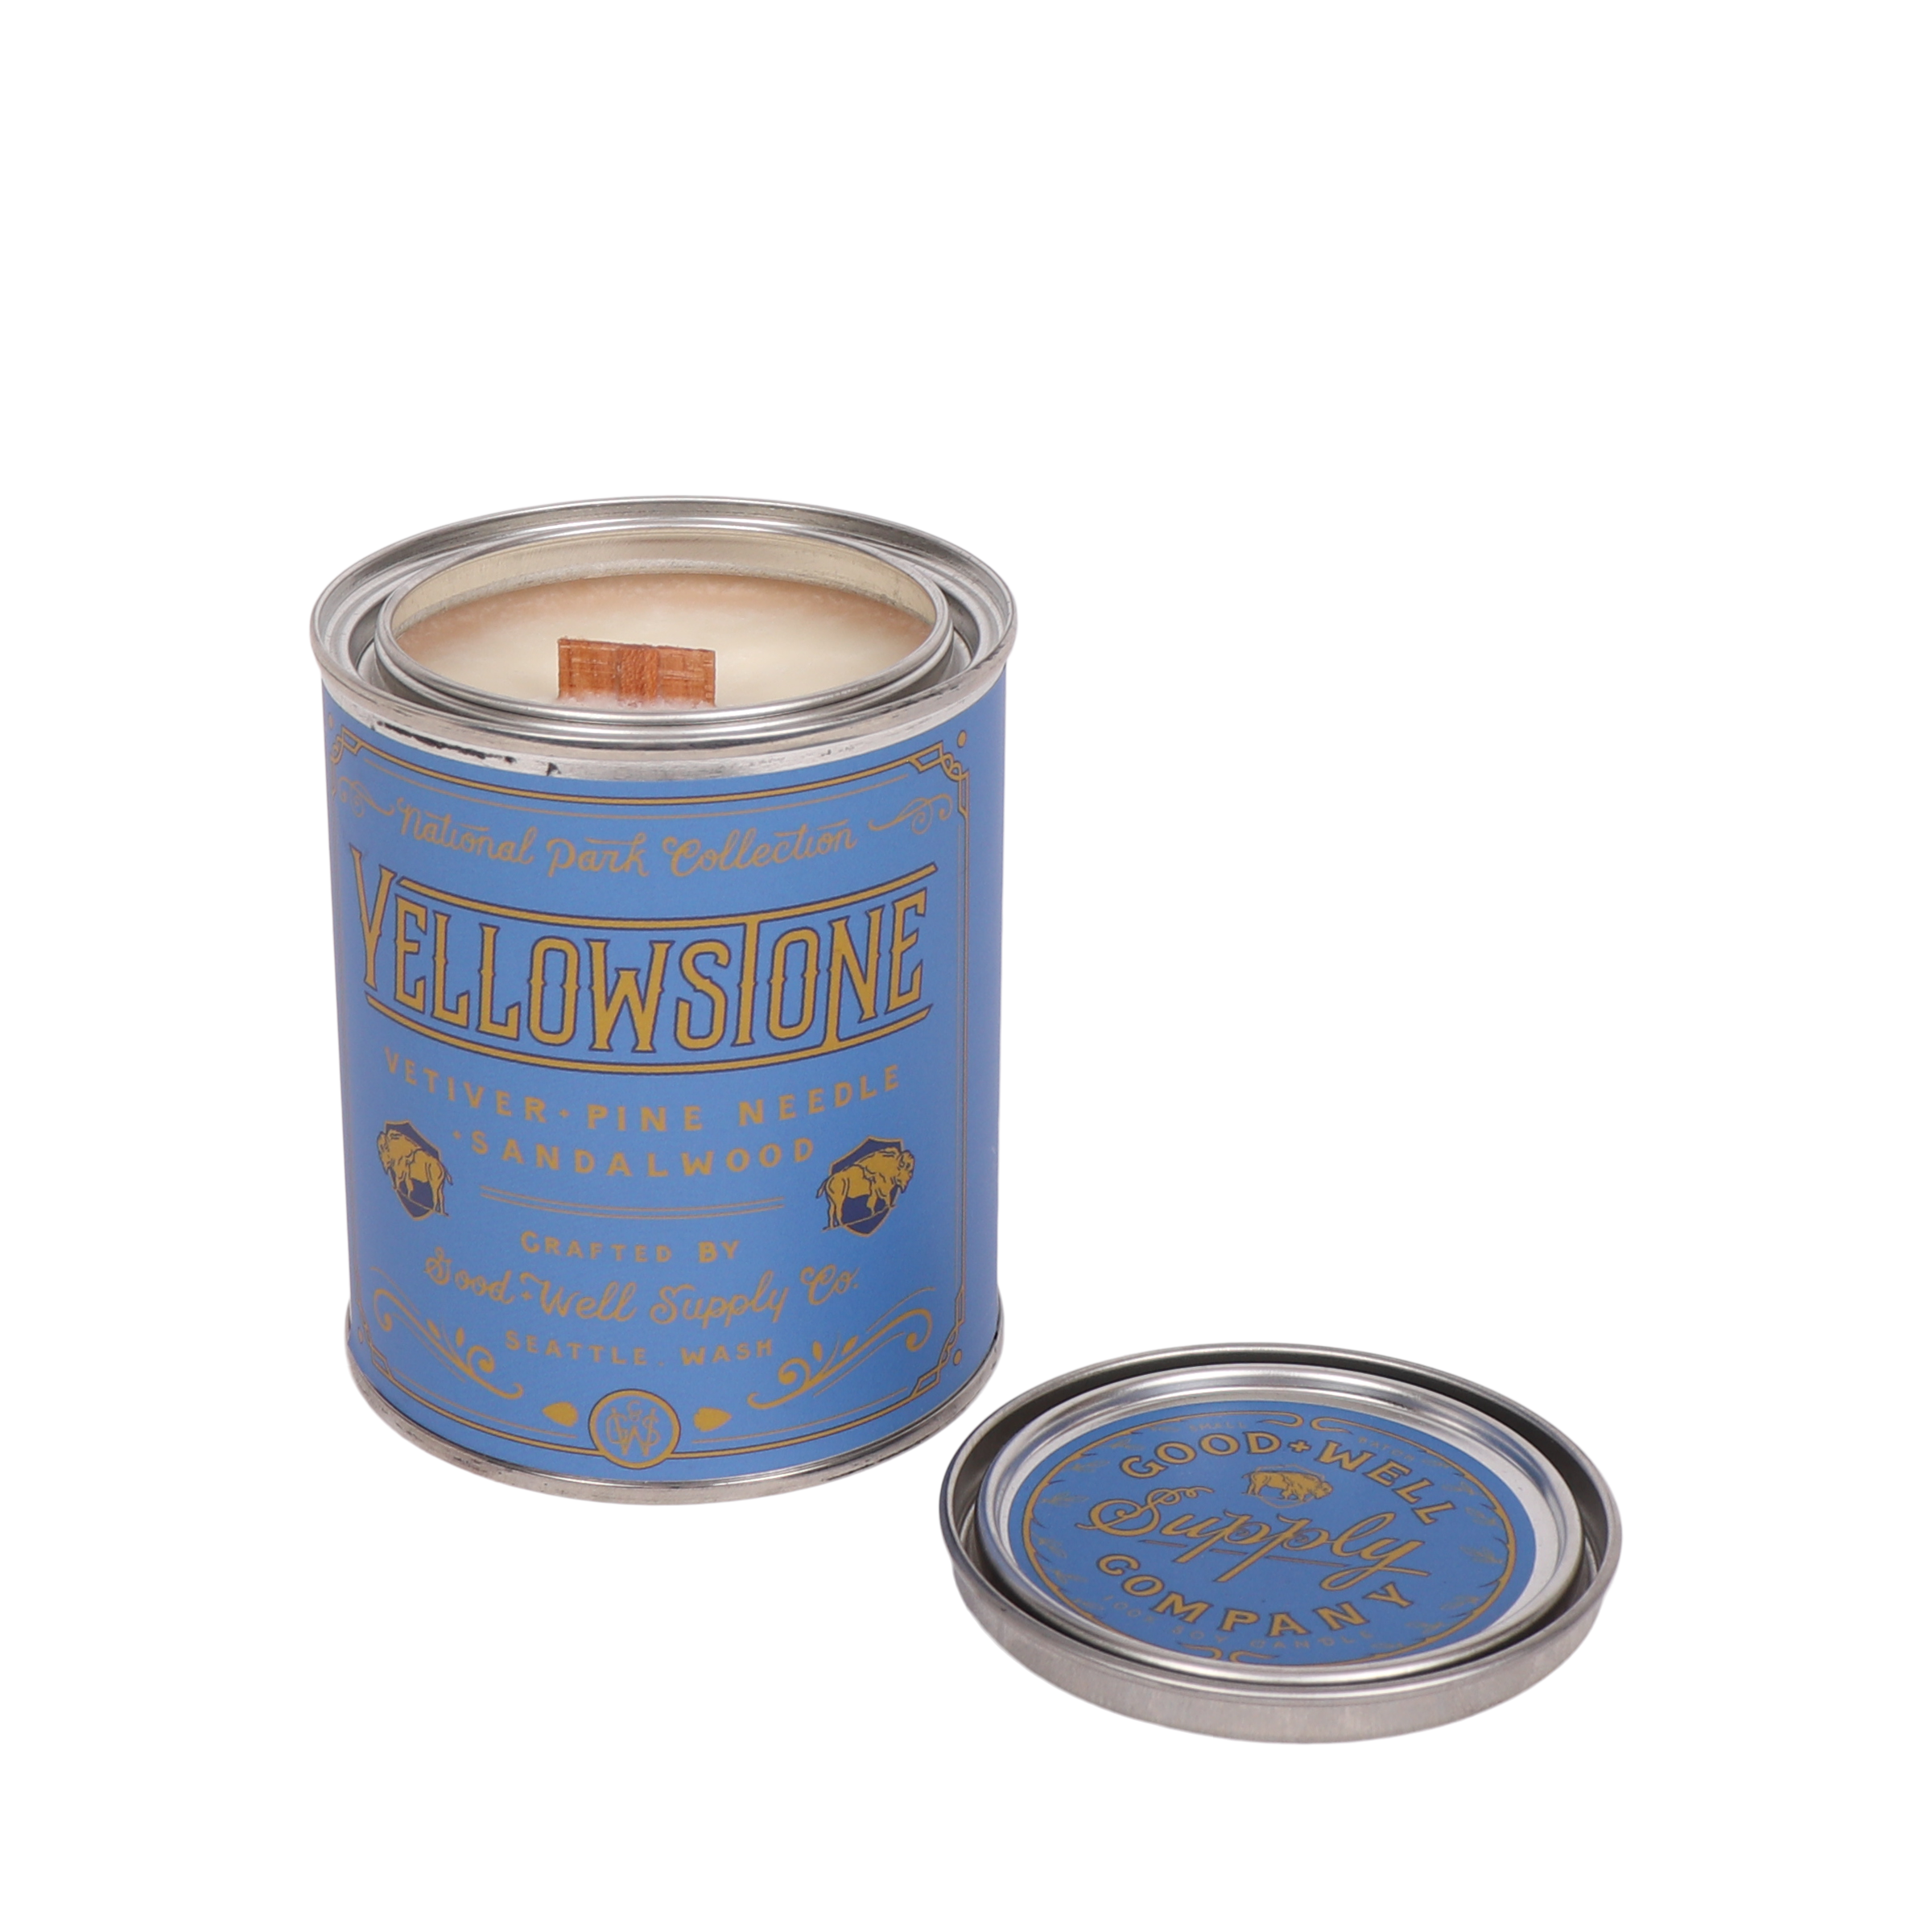 Yellowstone National Park Candle Tin